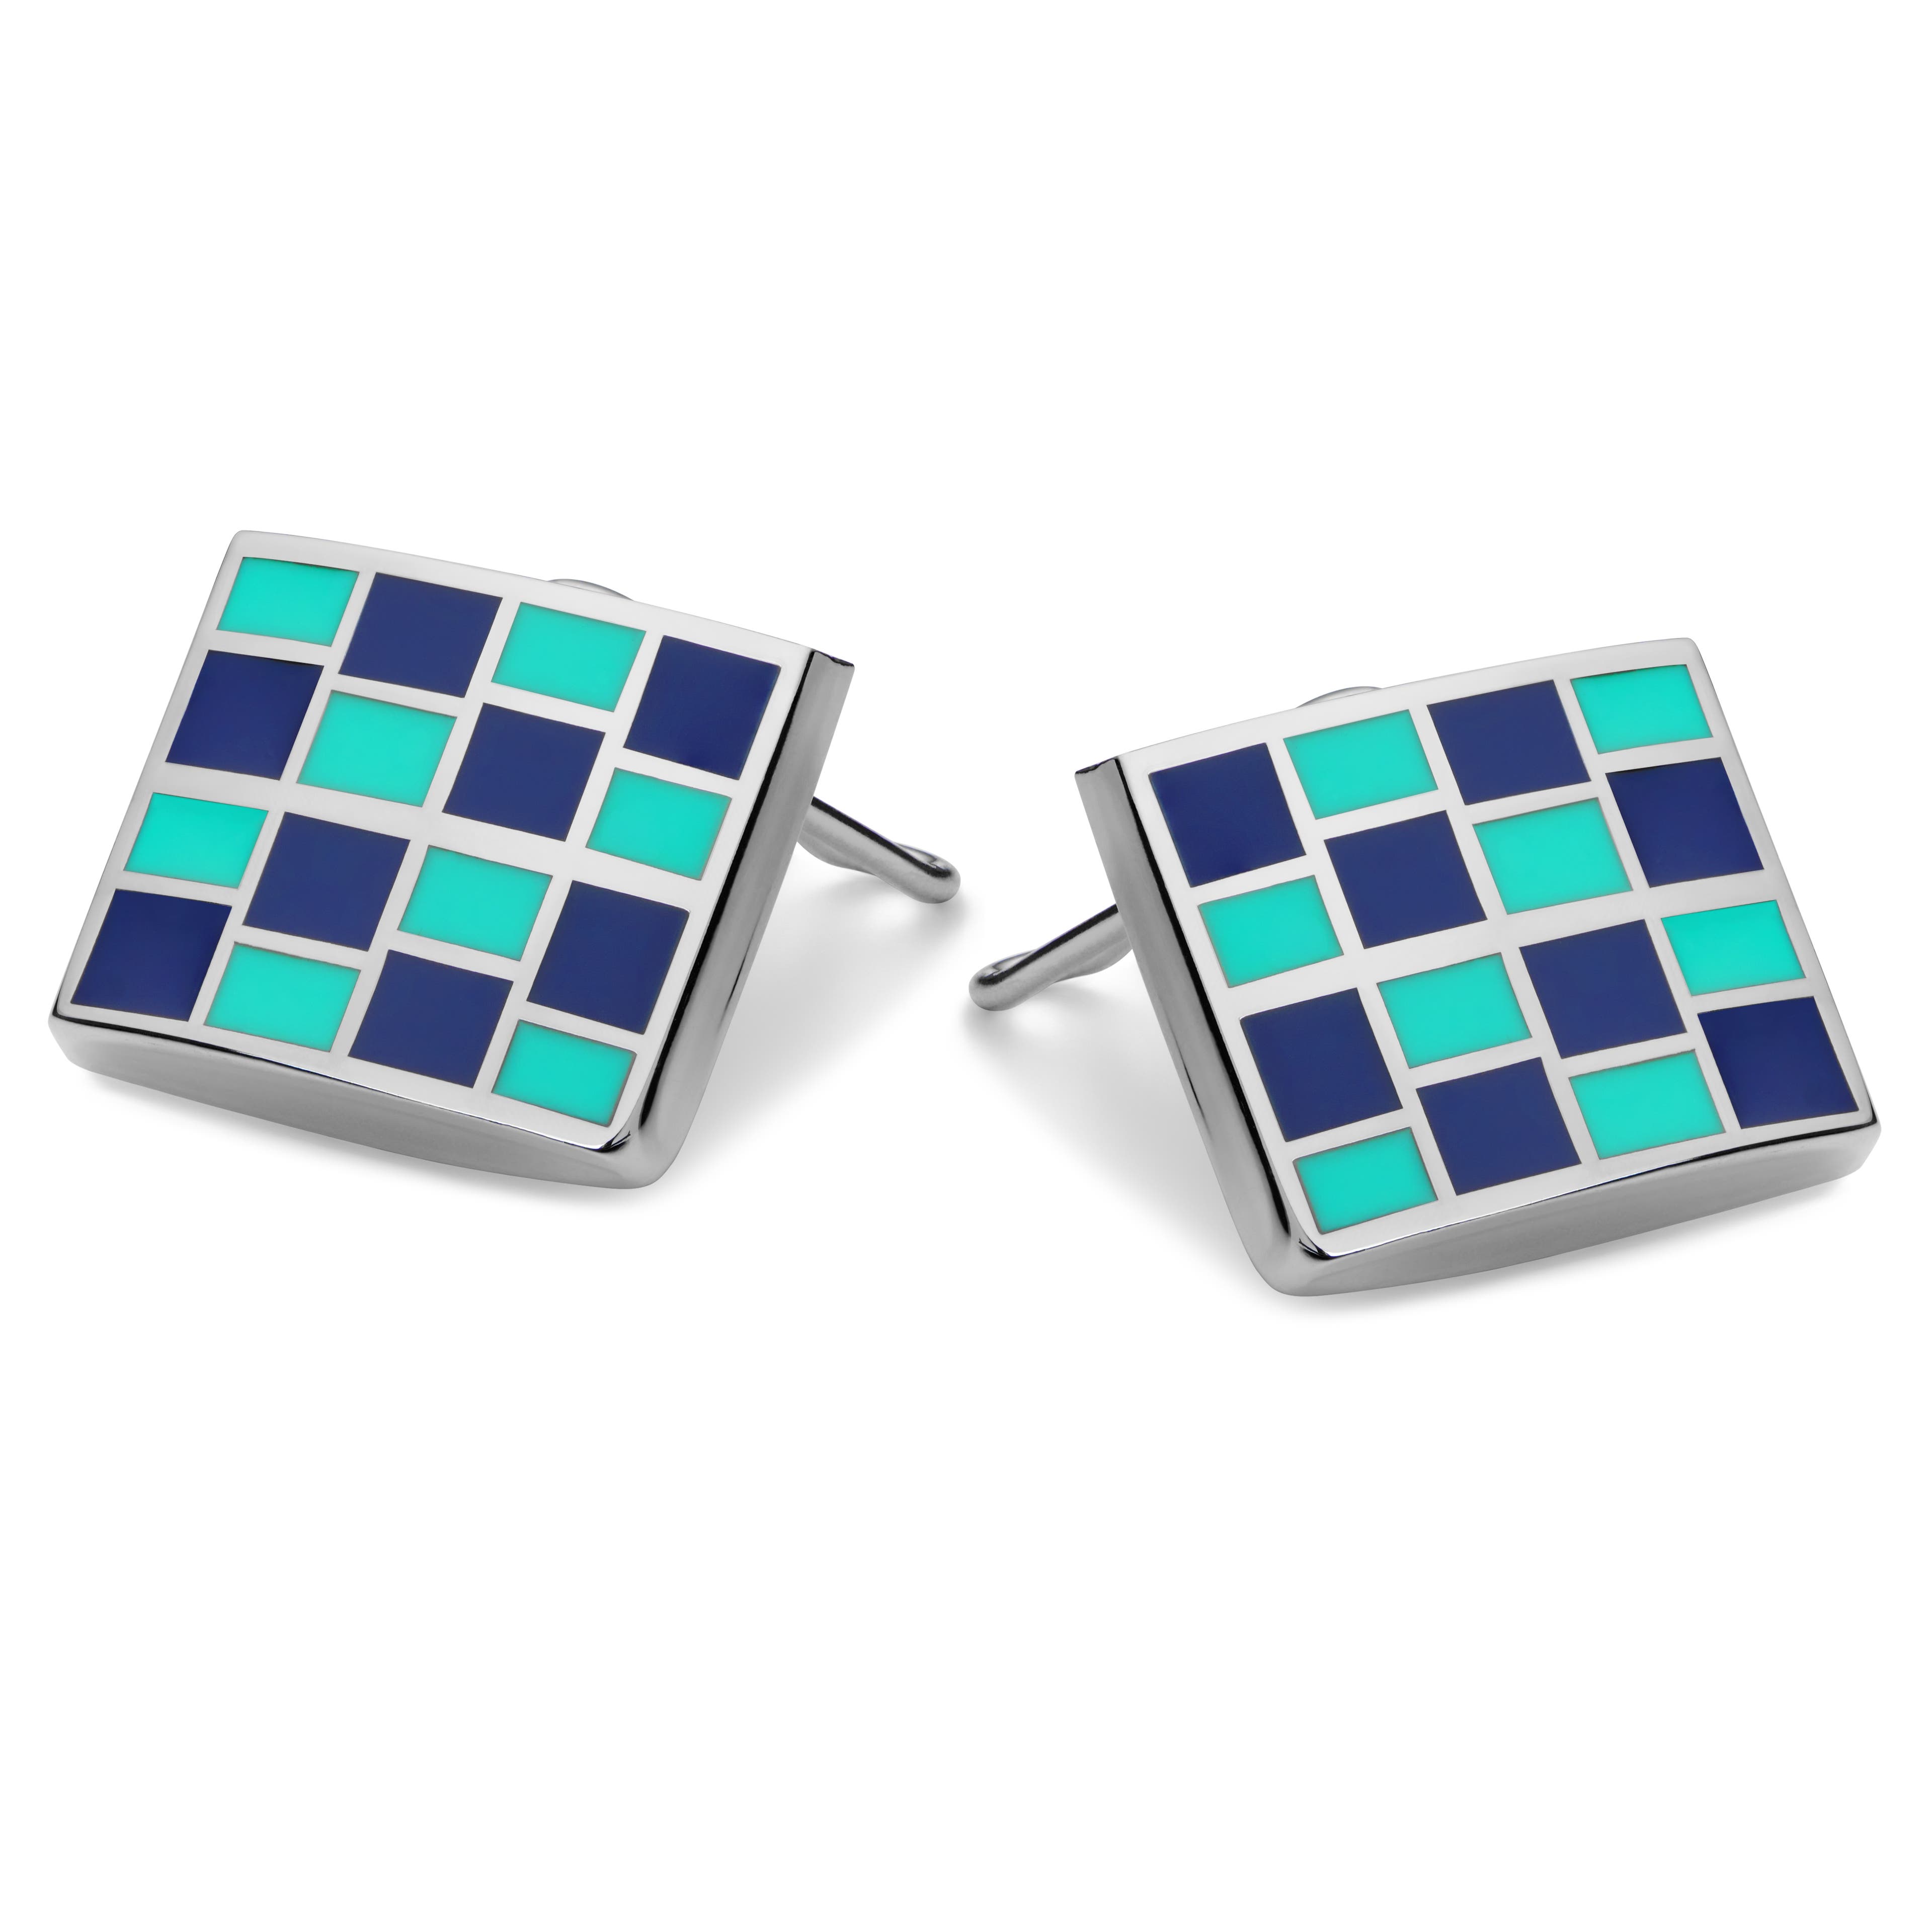 Square Silver-Tone, Royal Blue & Mint Green Chequered Copper Button Covers